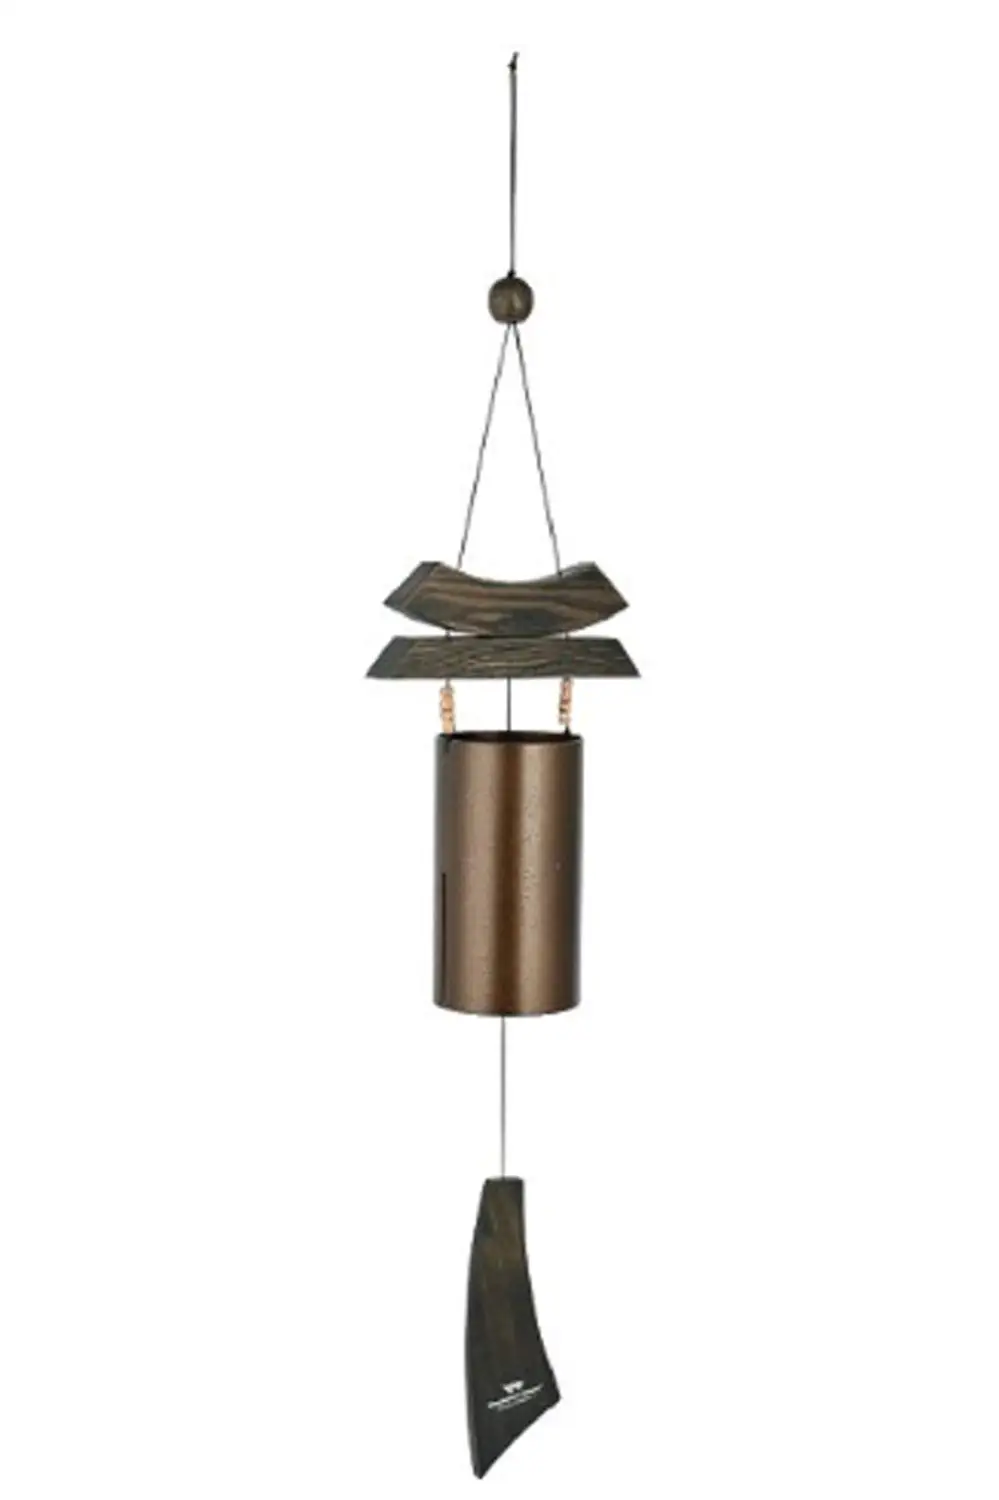 Cowbell Outdoor Wind Chime New New Windbell Heroic Windchime Antique Copper...